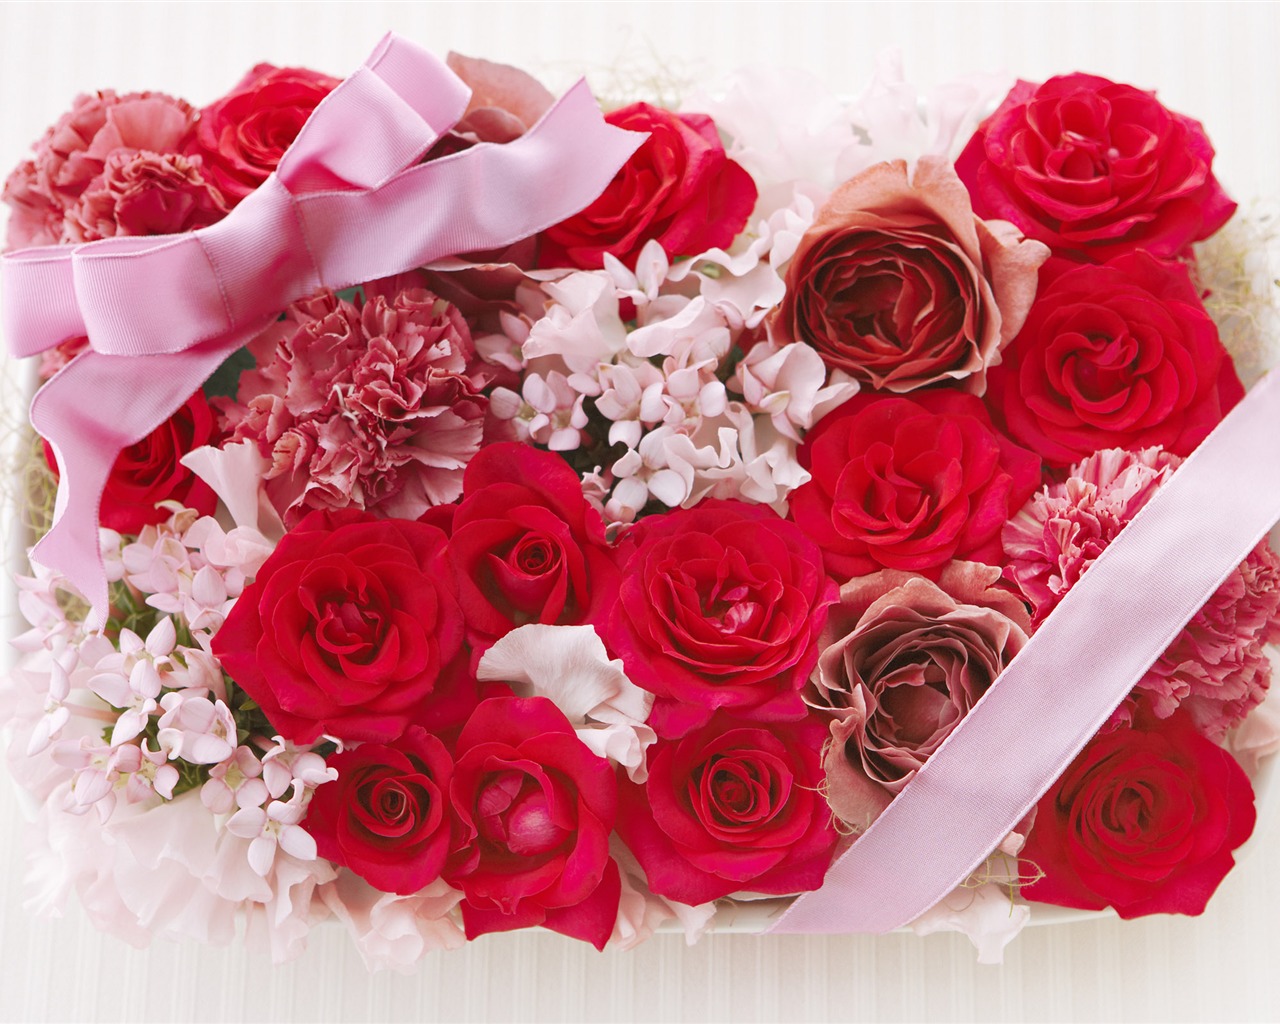 Flowers Gifts HD Wallpapers (1) #18 - 1280x1024